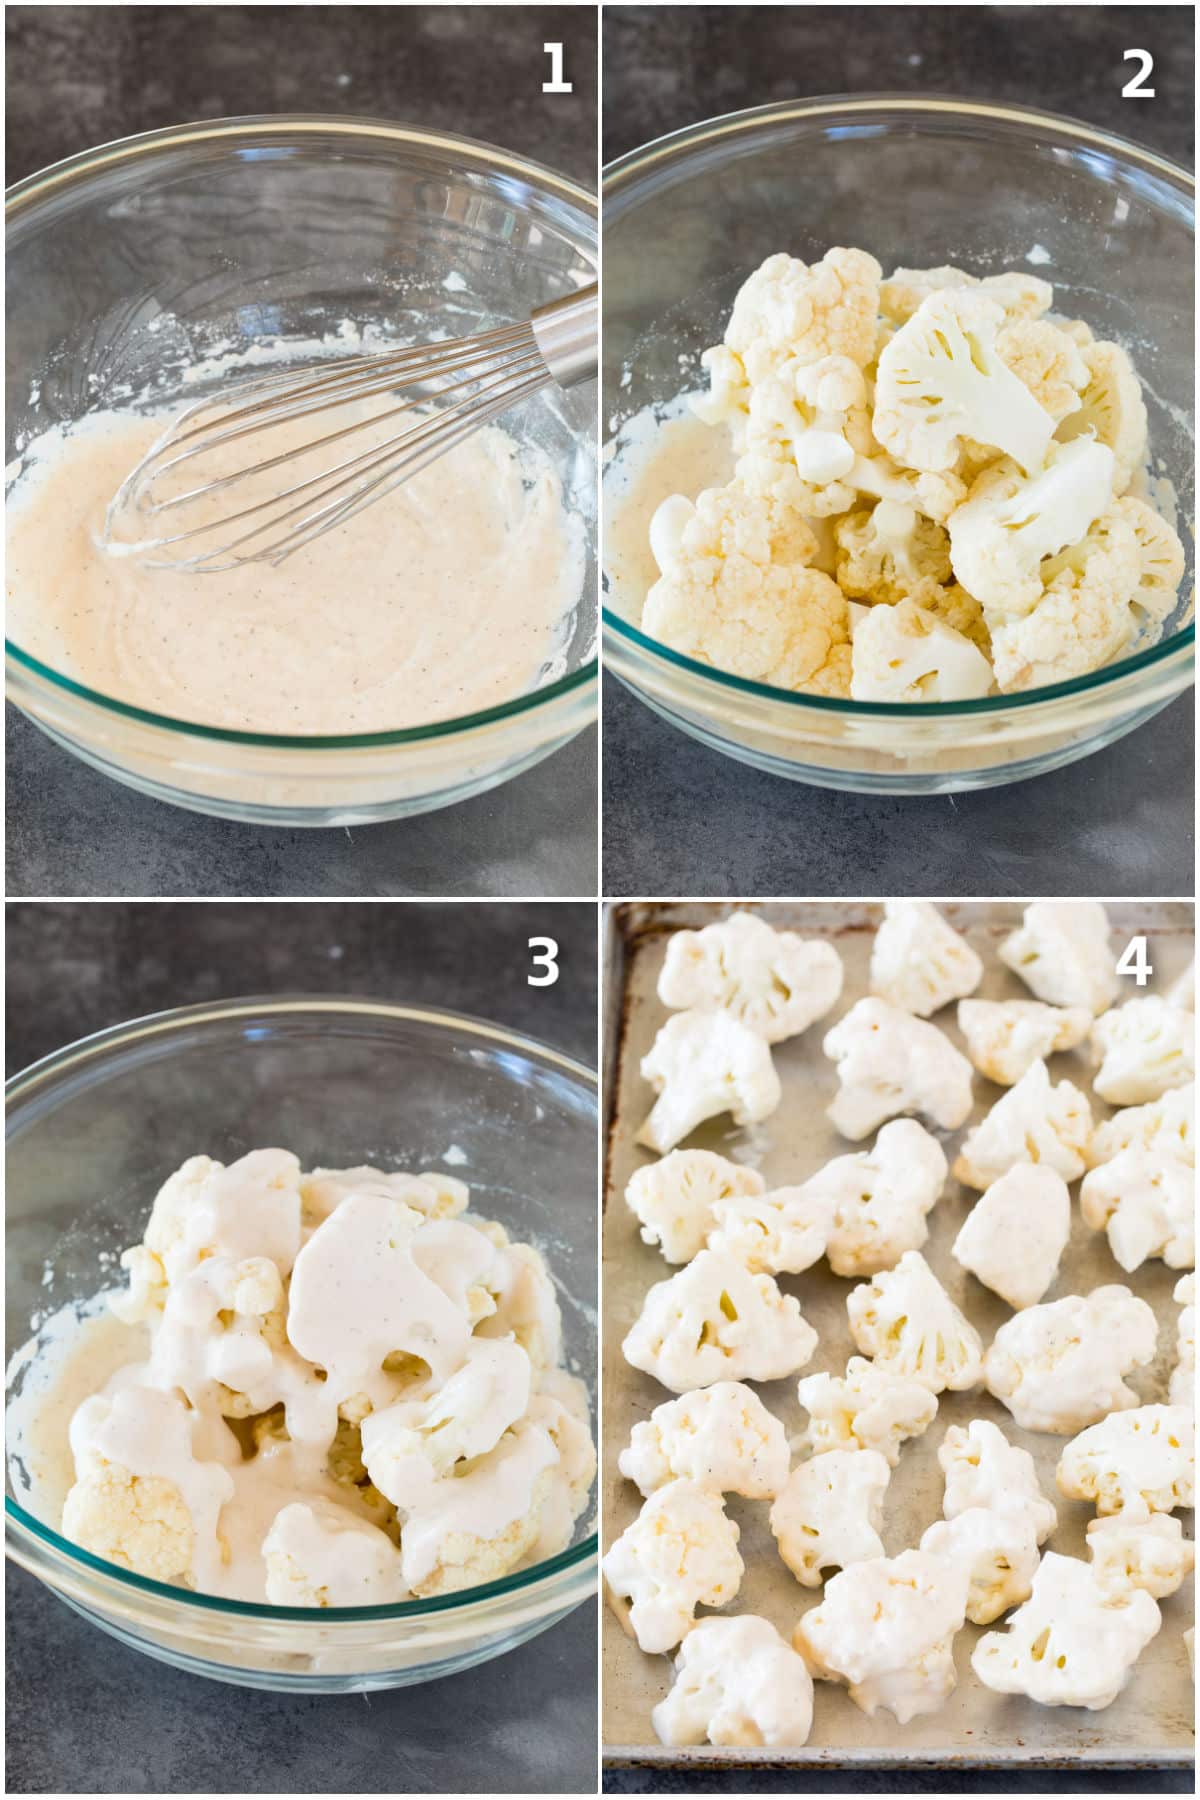 Process shots showing how to coat cauliflower in batter.